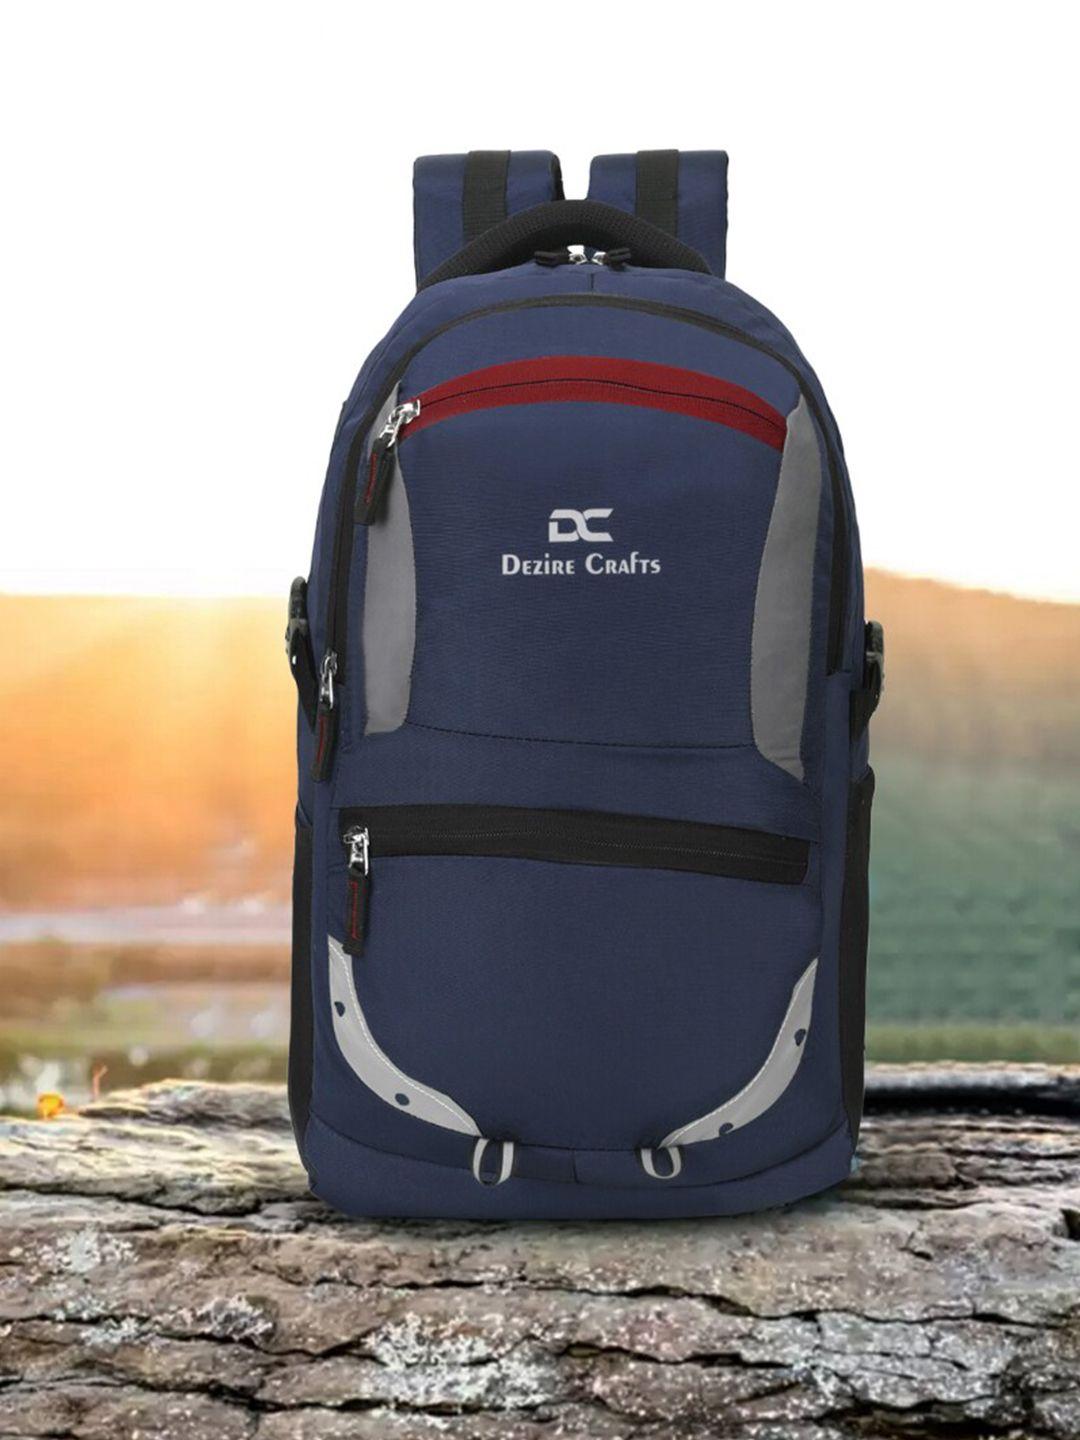 dezire-crafts-unisex-navy-blue-&-grey-backpack-with-reflective-strip